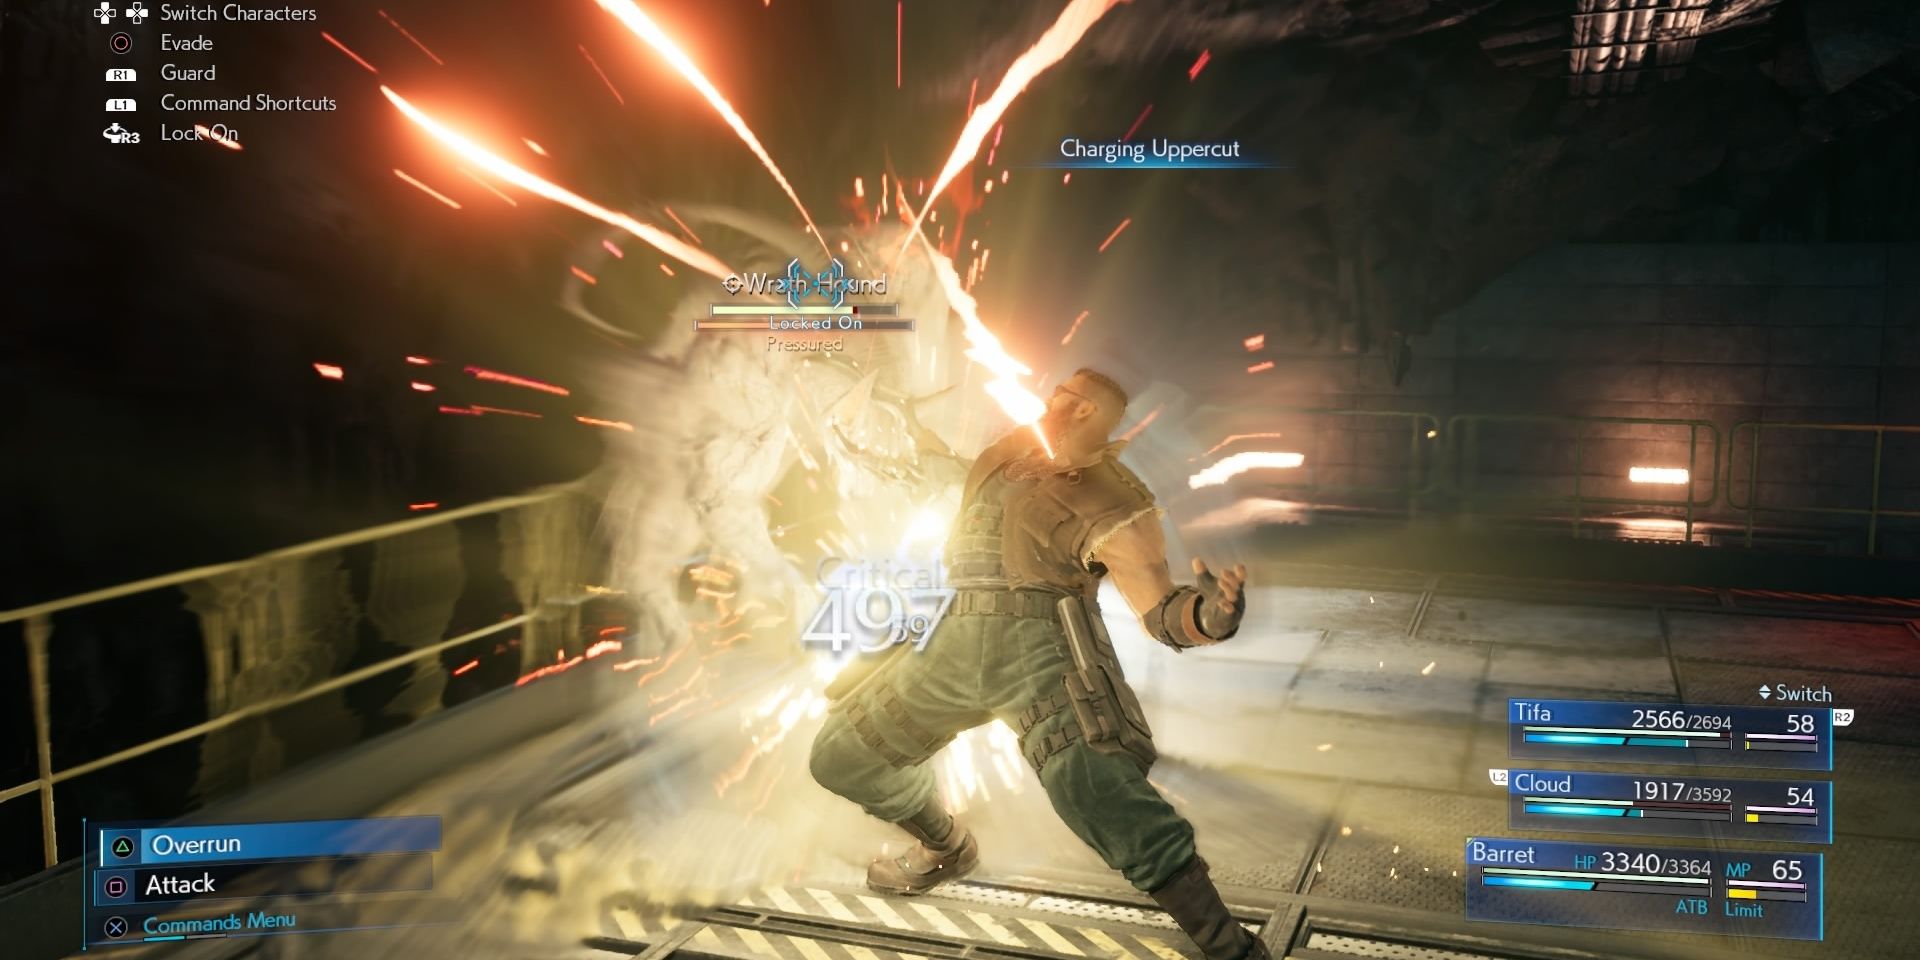 Barret's Charging Uppercut ability from FFVII Remake